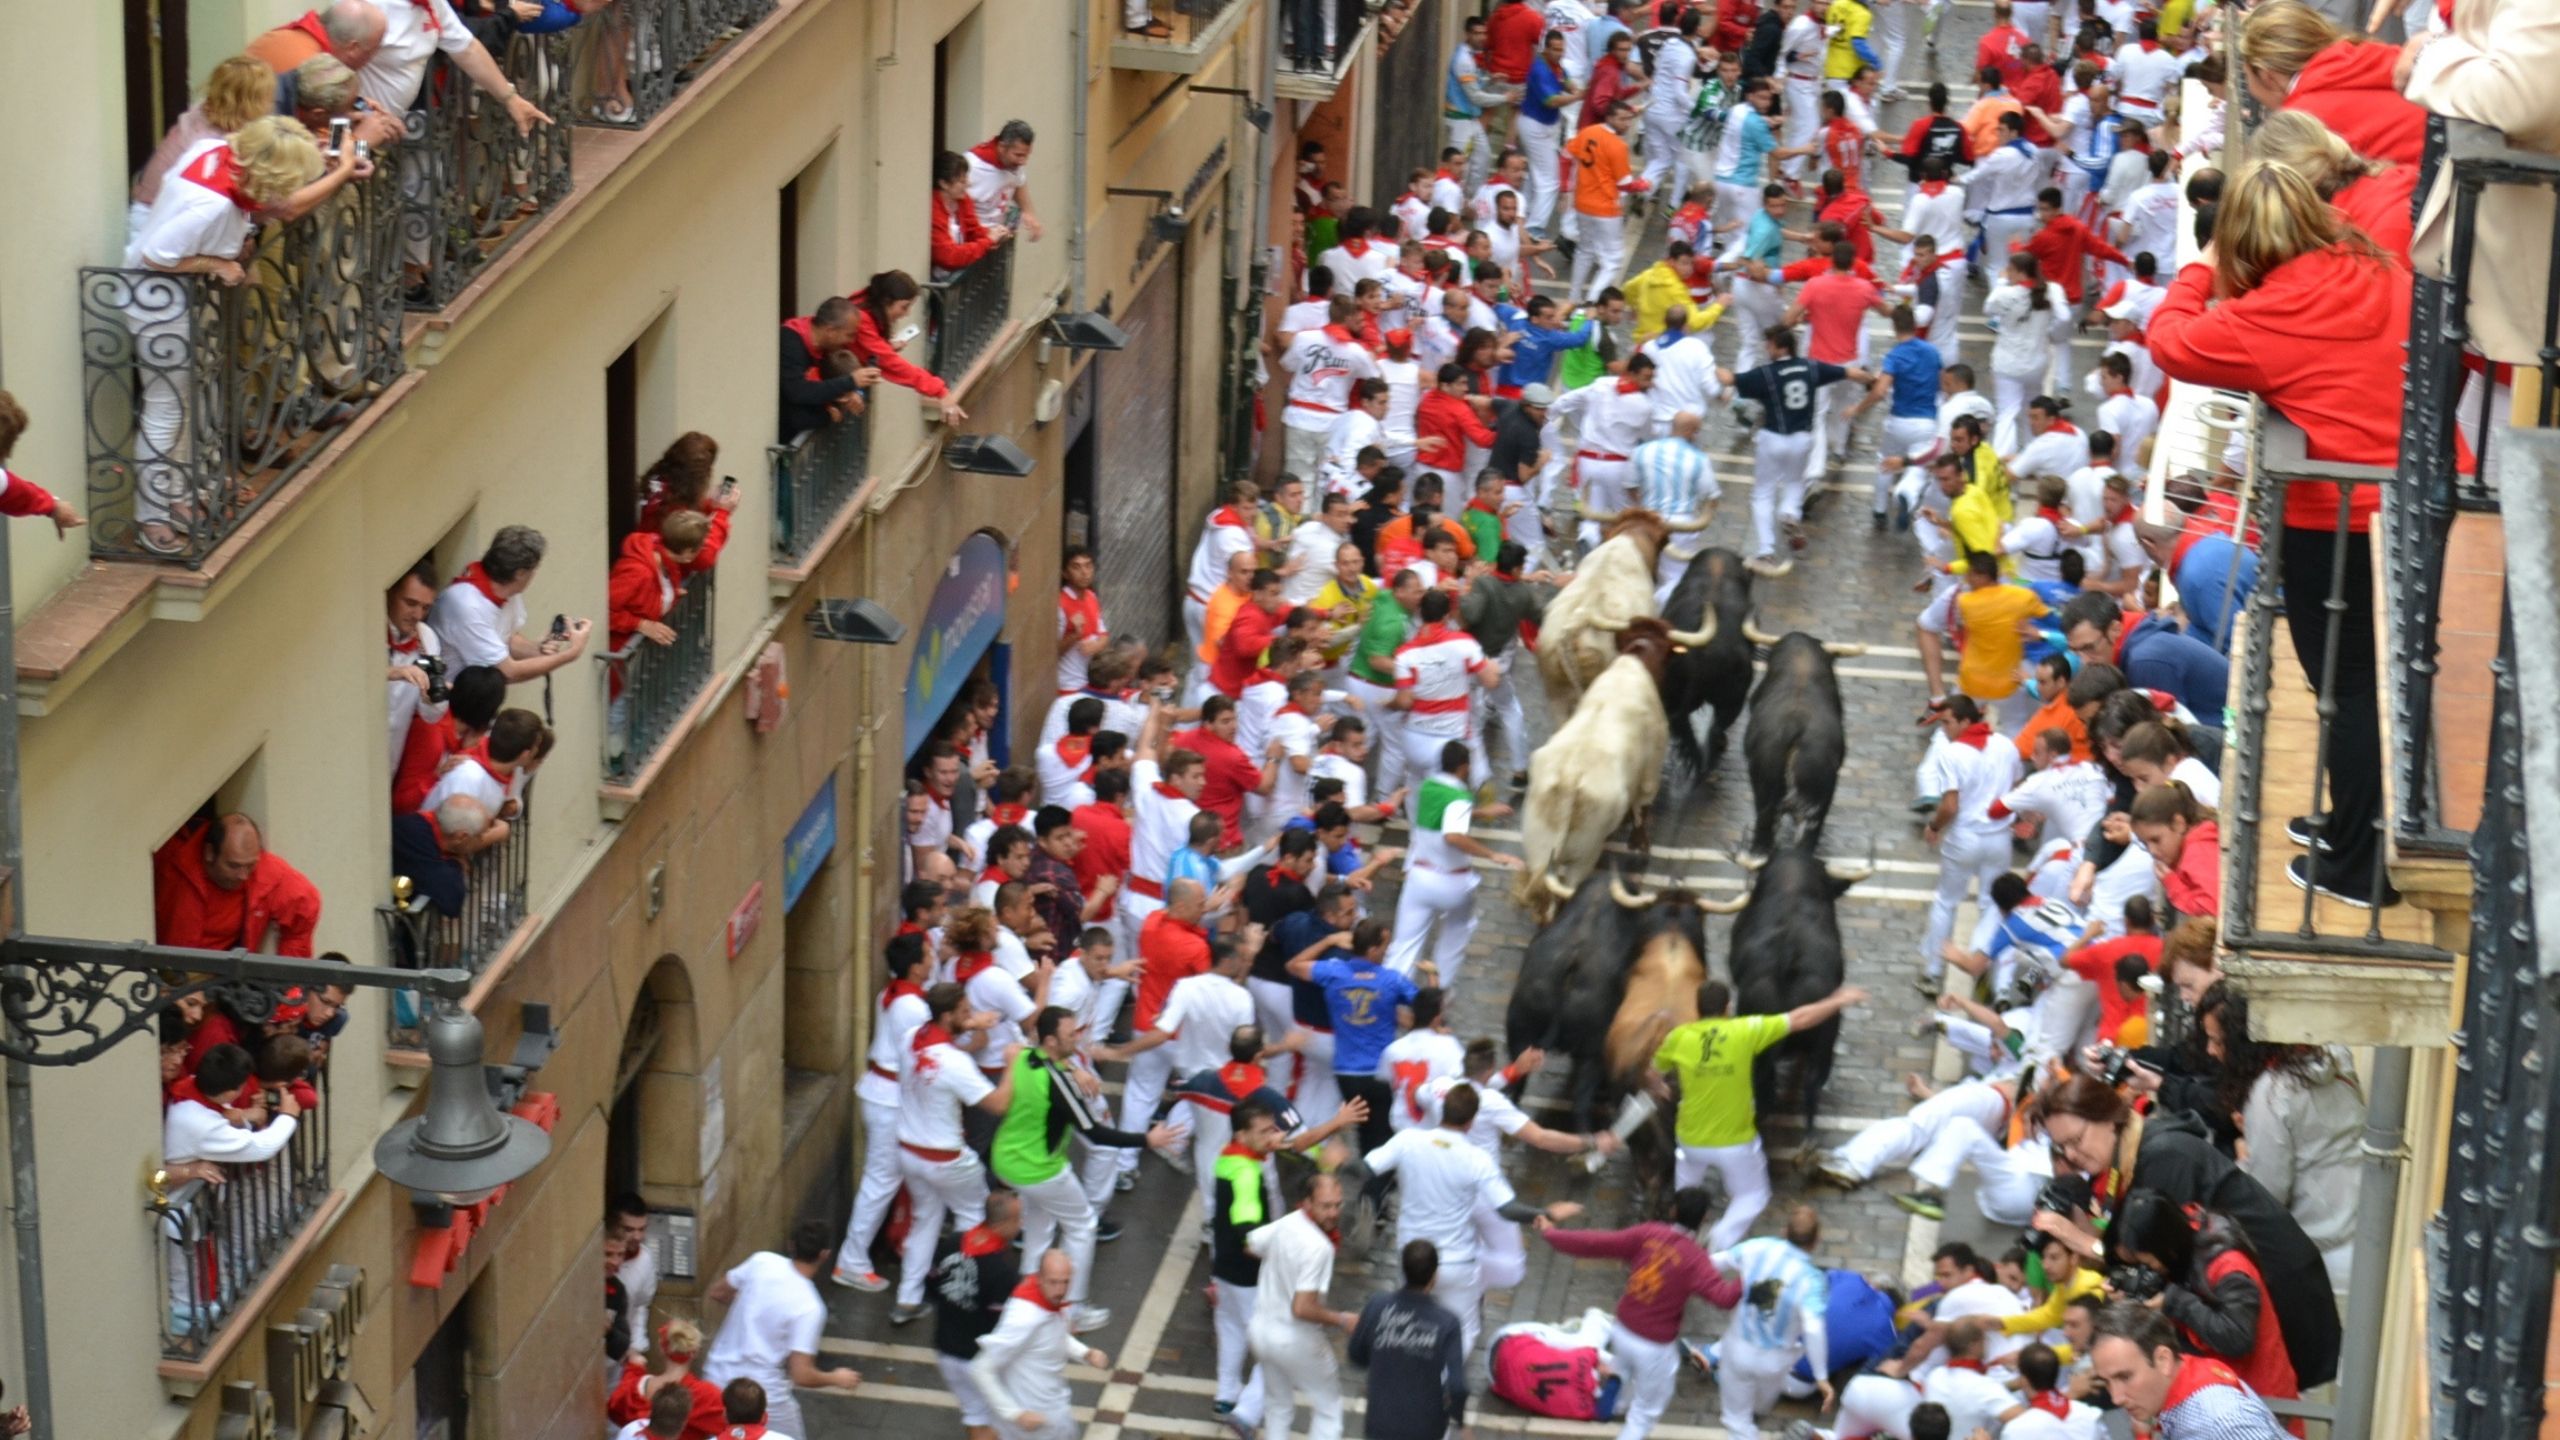 Visit the Pamplona of Sanfermines and bull running